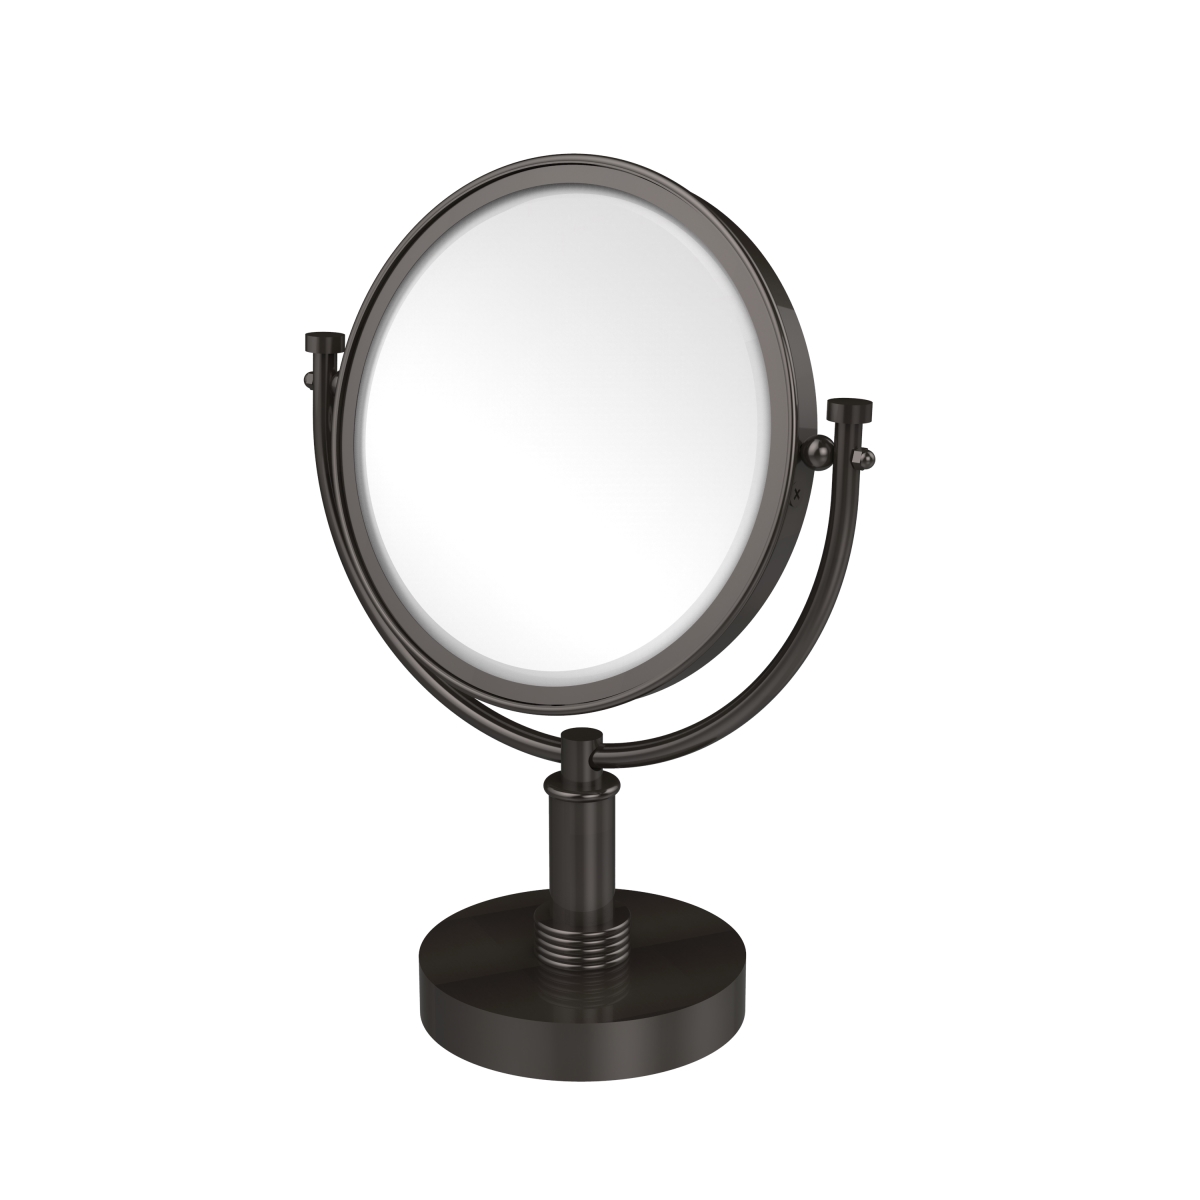 Dm-4g-2x-orb Grooved Ring Style 8 In. Vanity Top Make-up Mirror 2x Magnification, Oil Rubbed Bronze